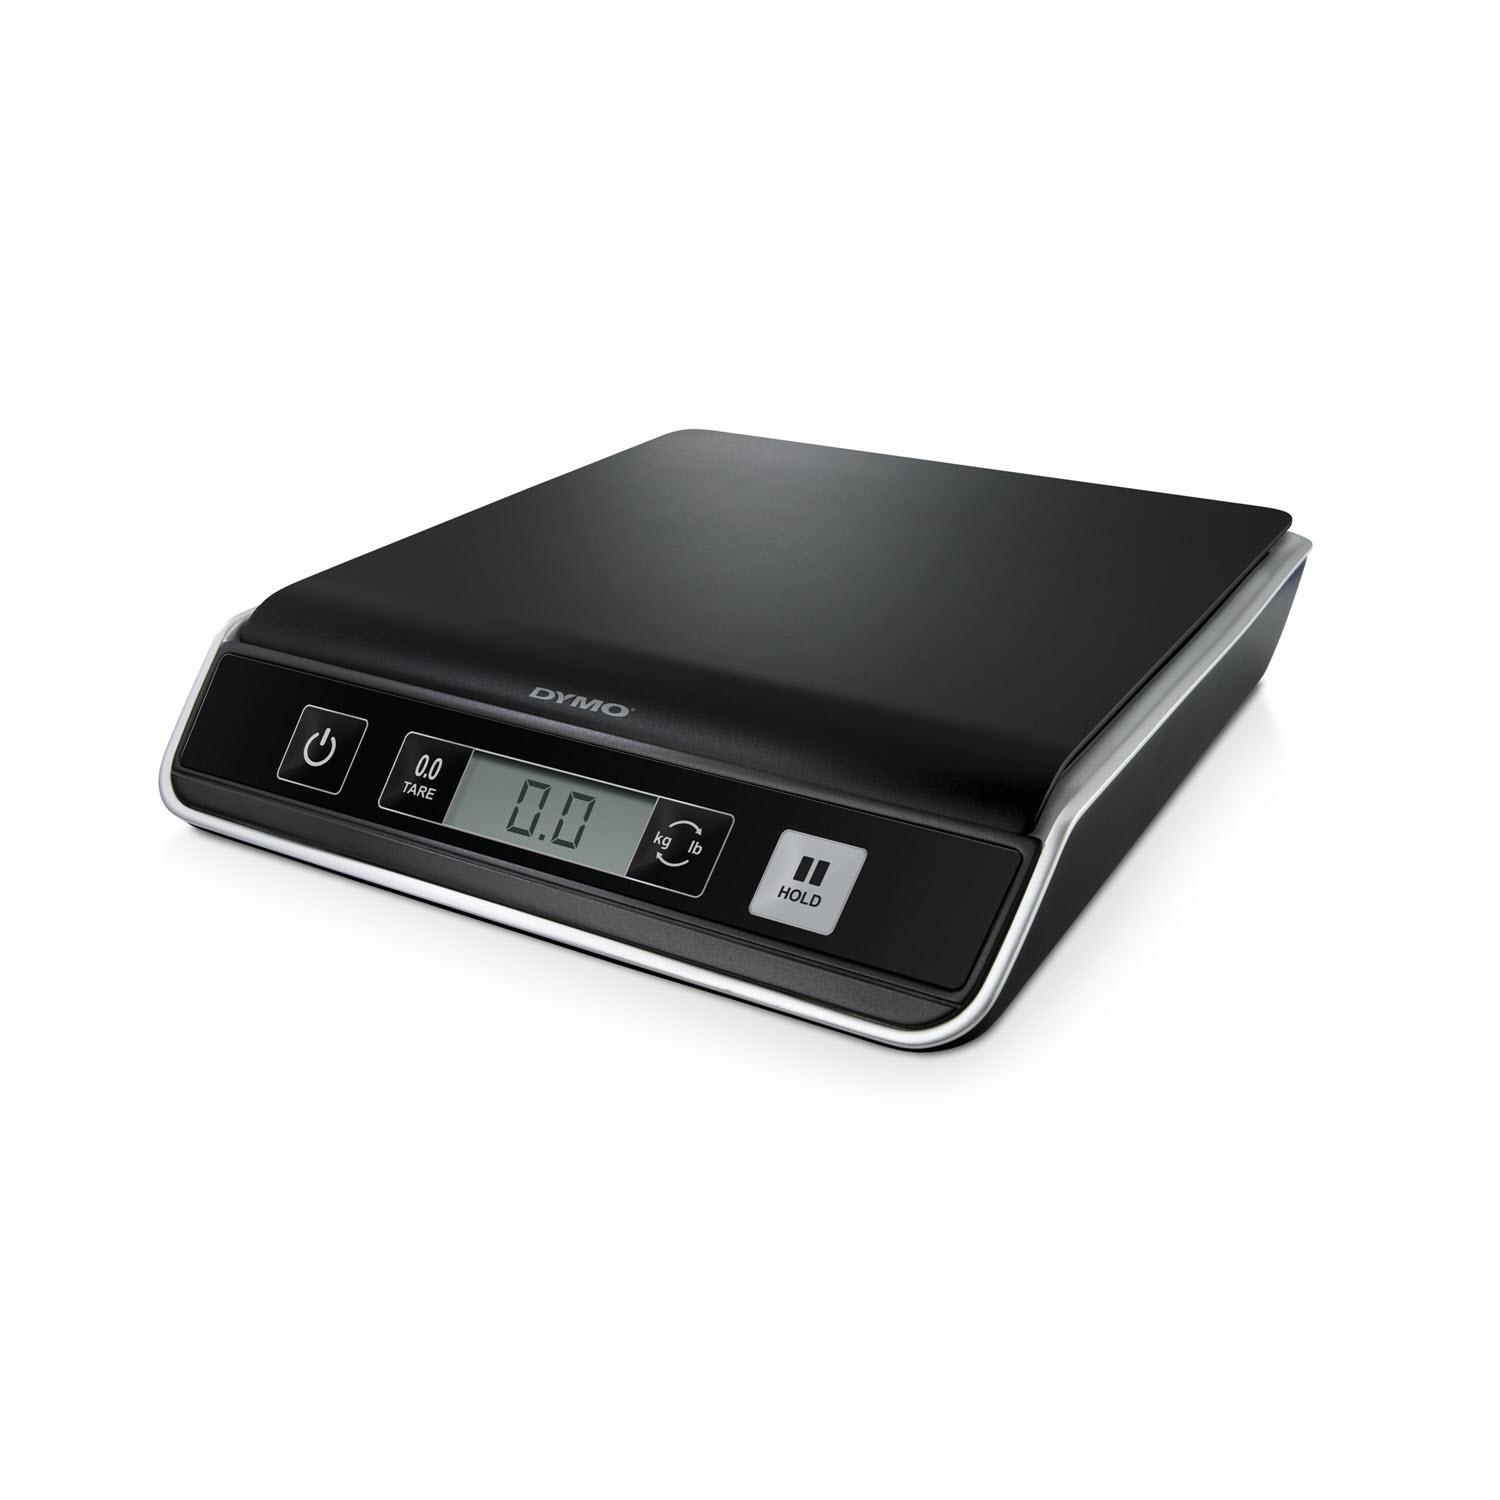 5KG Digital Electronic Kitchen Postal Scales Postage Parcel Weighing Weight Pack